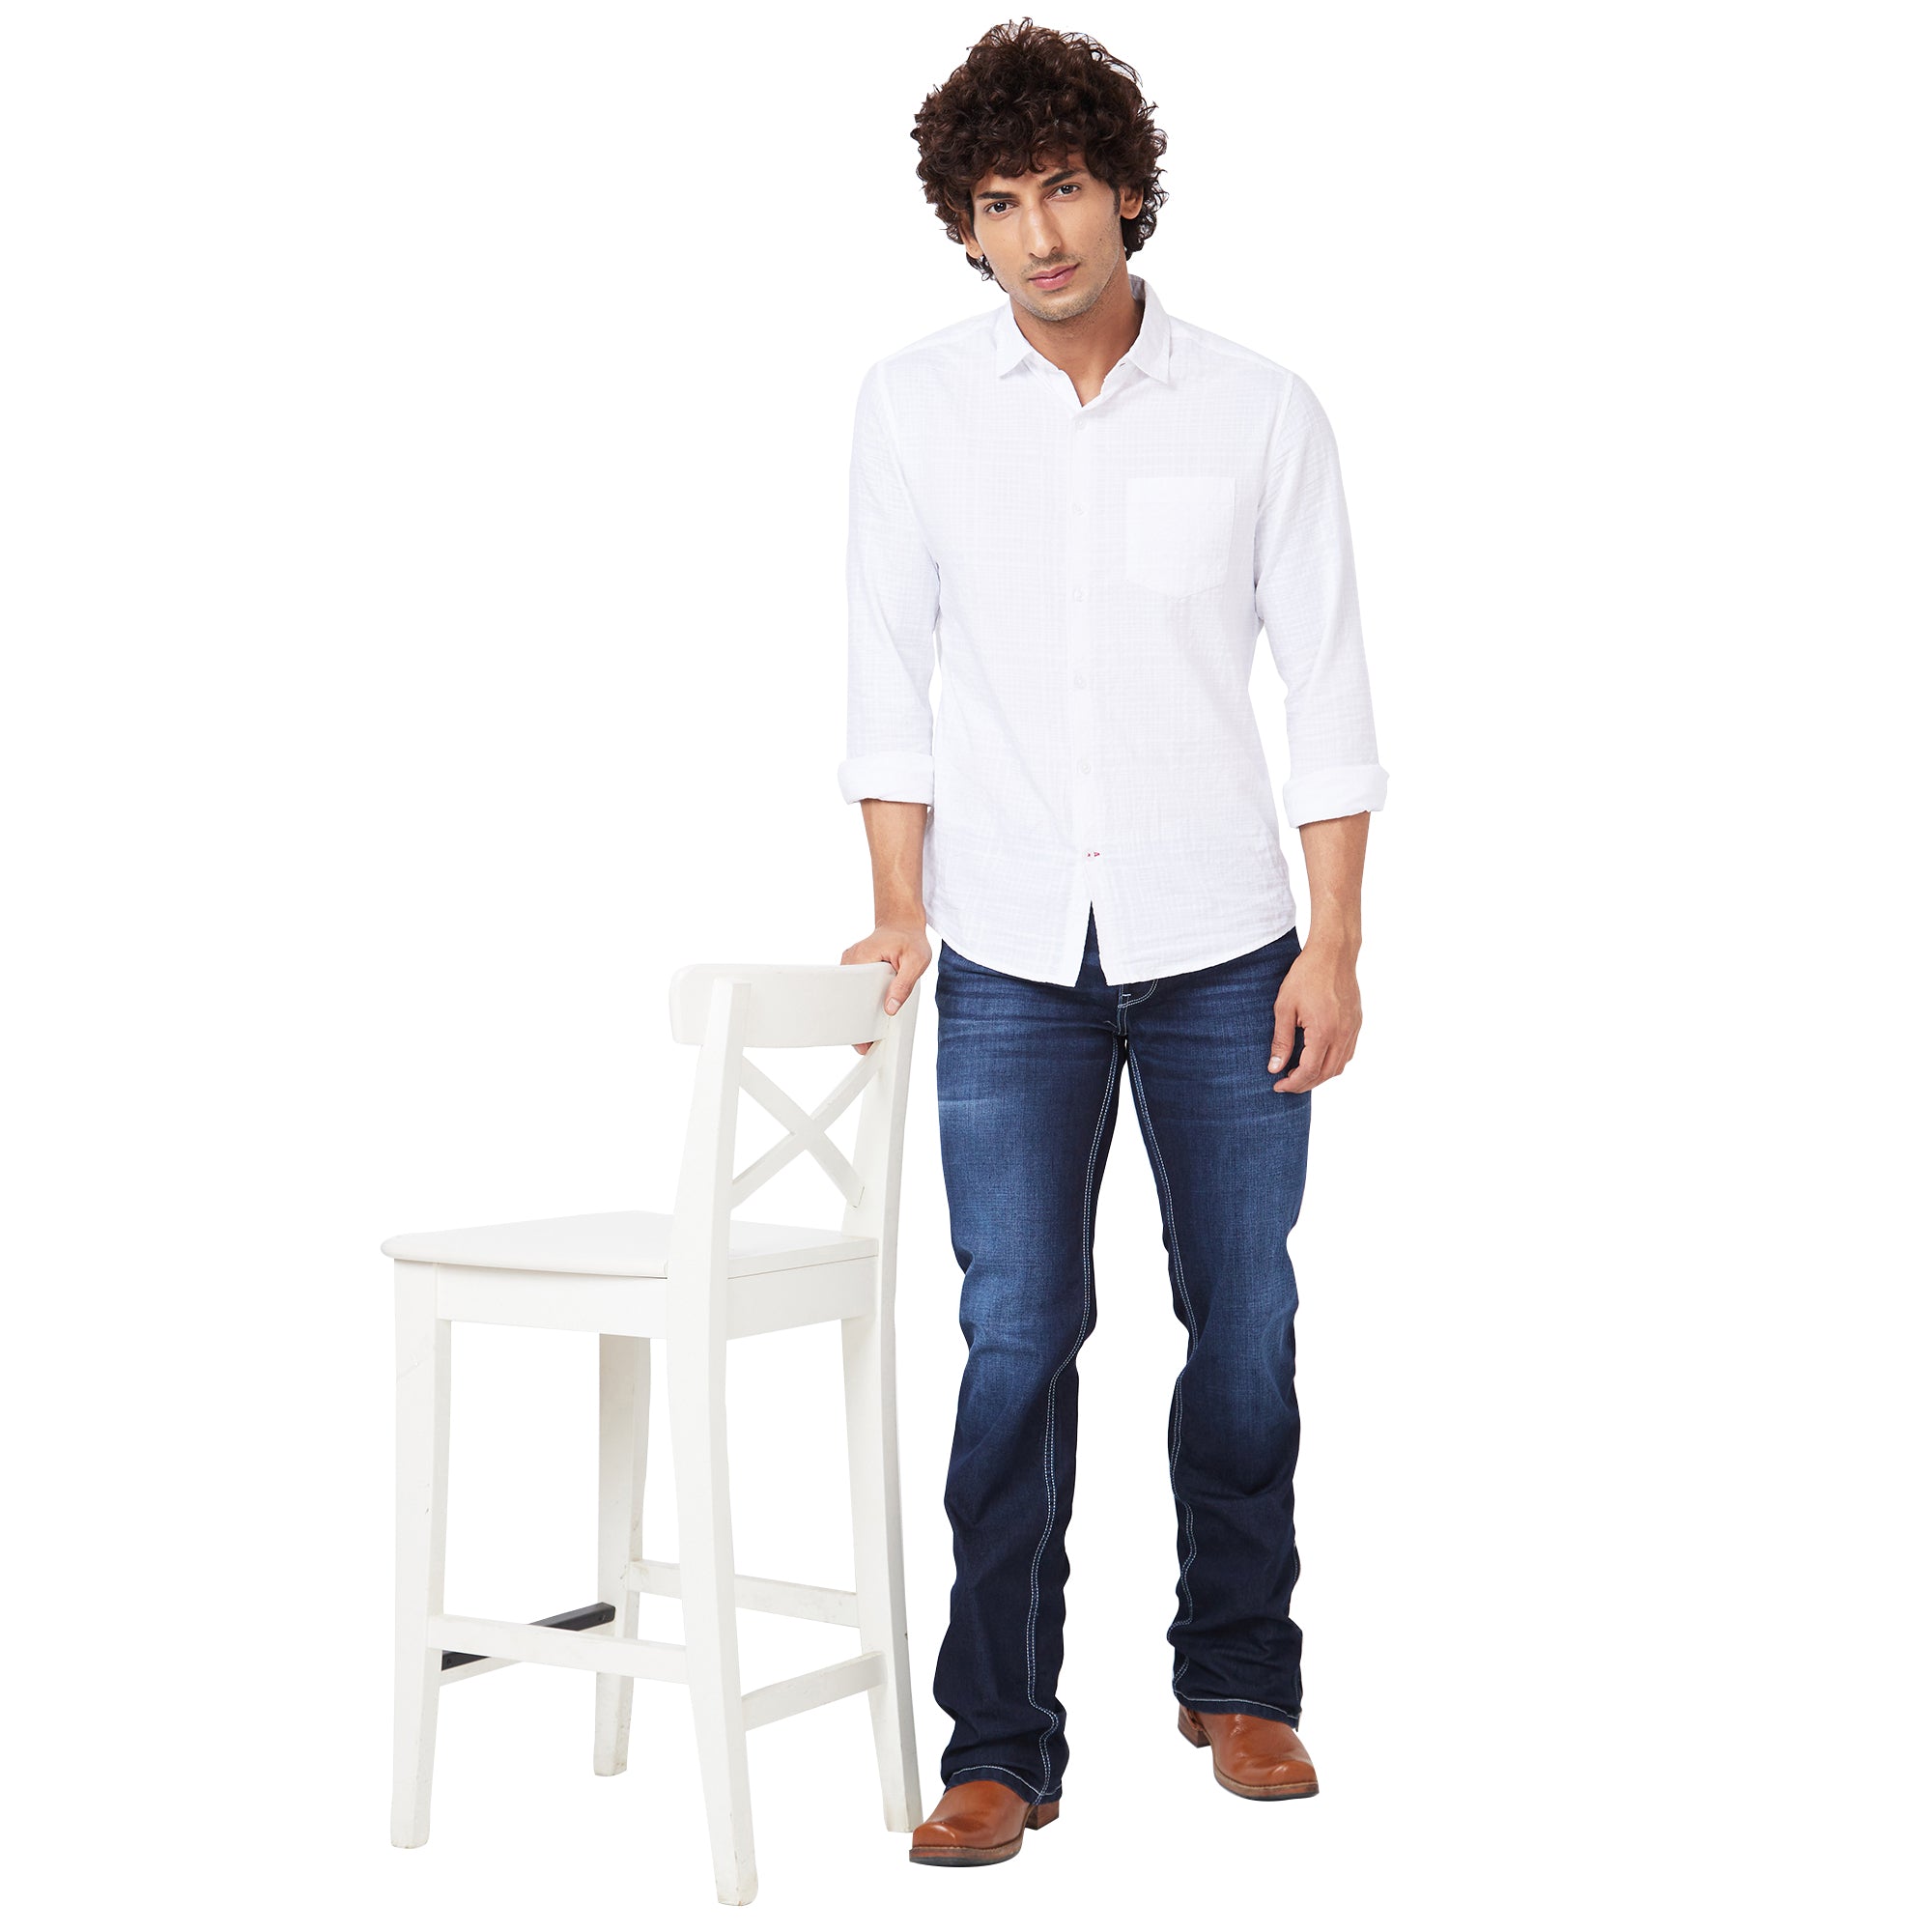 Authentic Men's Bootcut Jeans, Casual & Formal Shirts